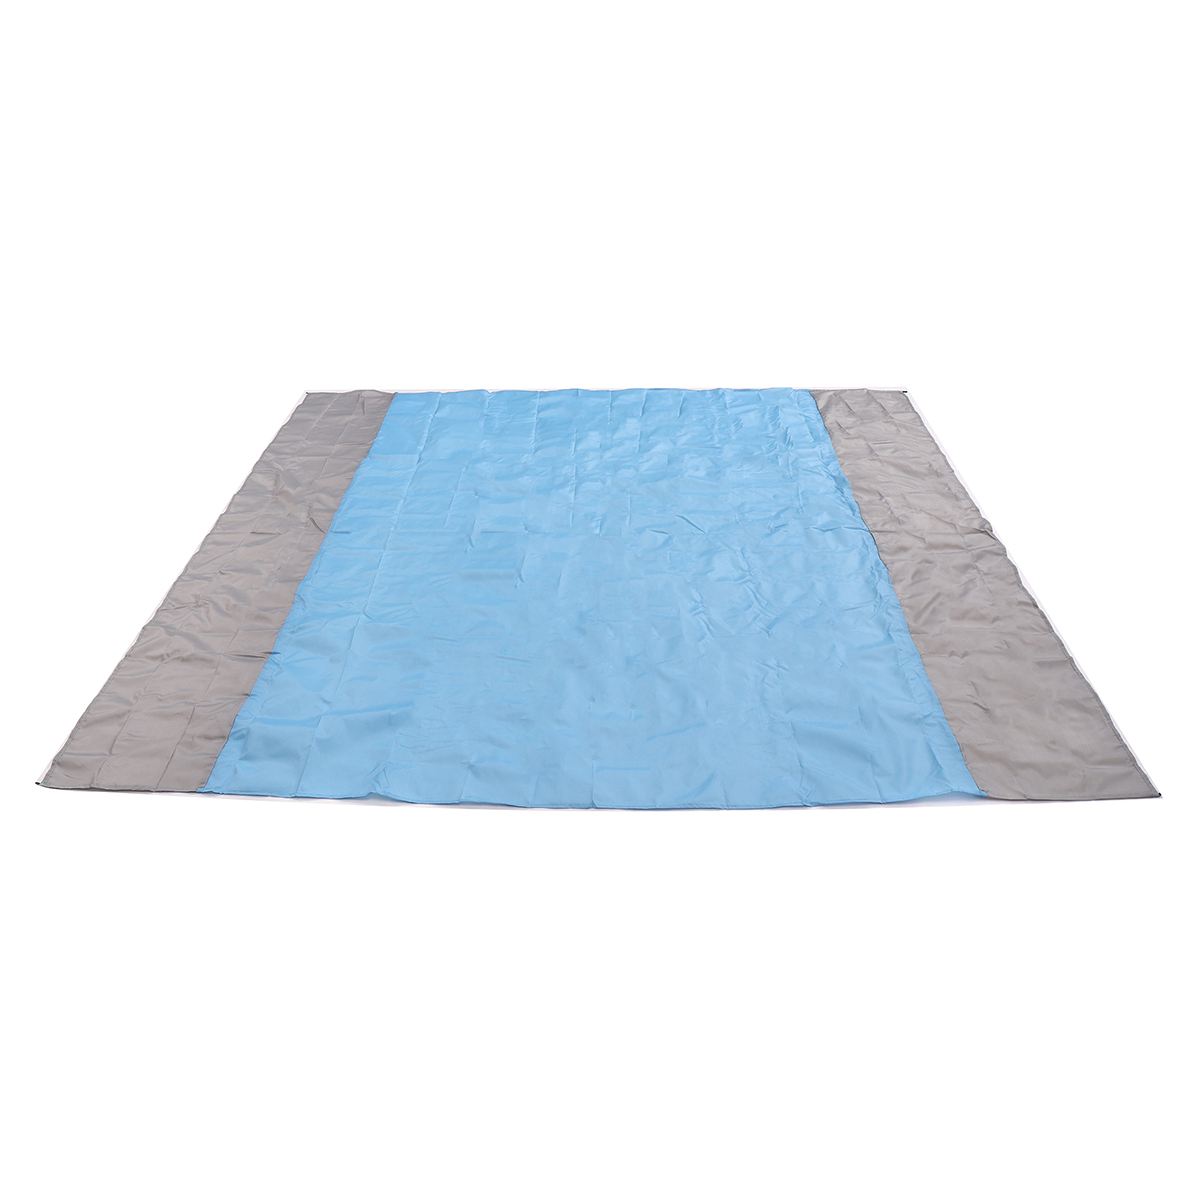 210x200cm-Picnic-Blanket-Oxford-Foldable-Beach-Mat-Waterproof-Quick-Drying-Sand-Proof-Camping-Blanke-1715217-3